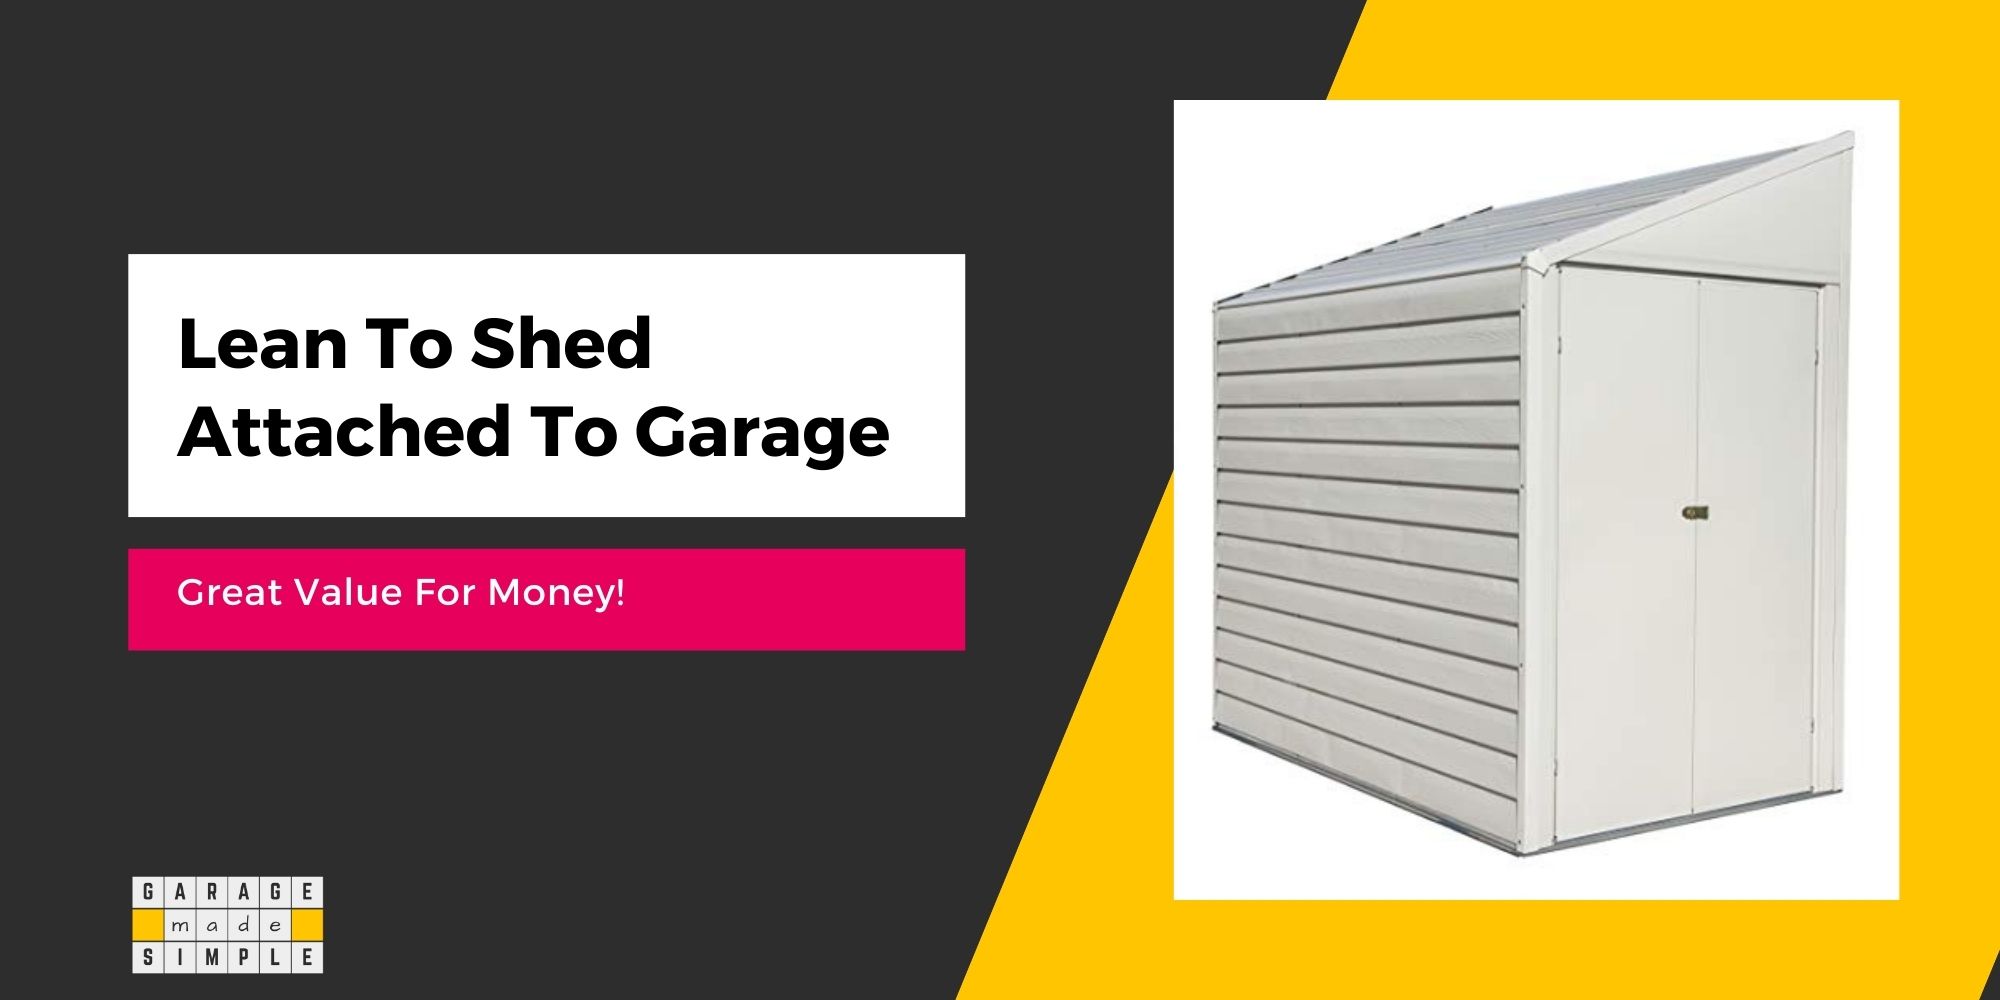 Lean To Shed Attached To Garage (Great Value For Money!)